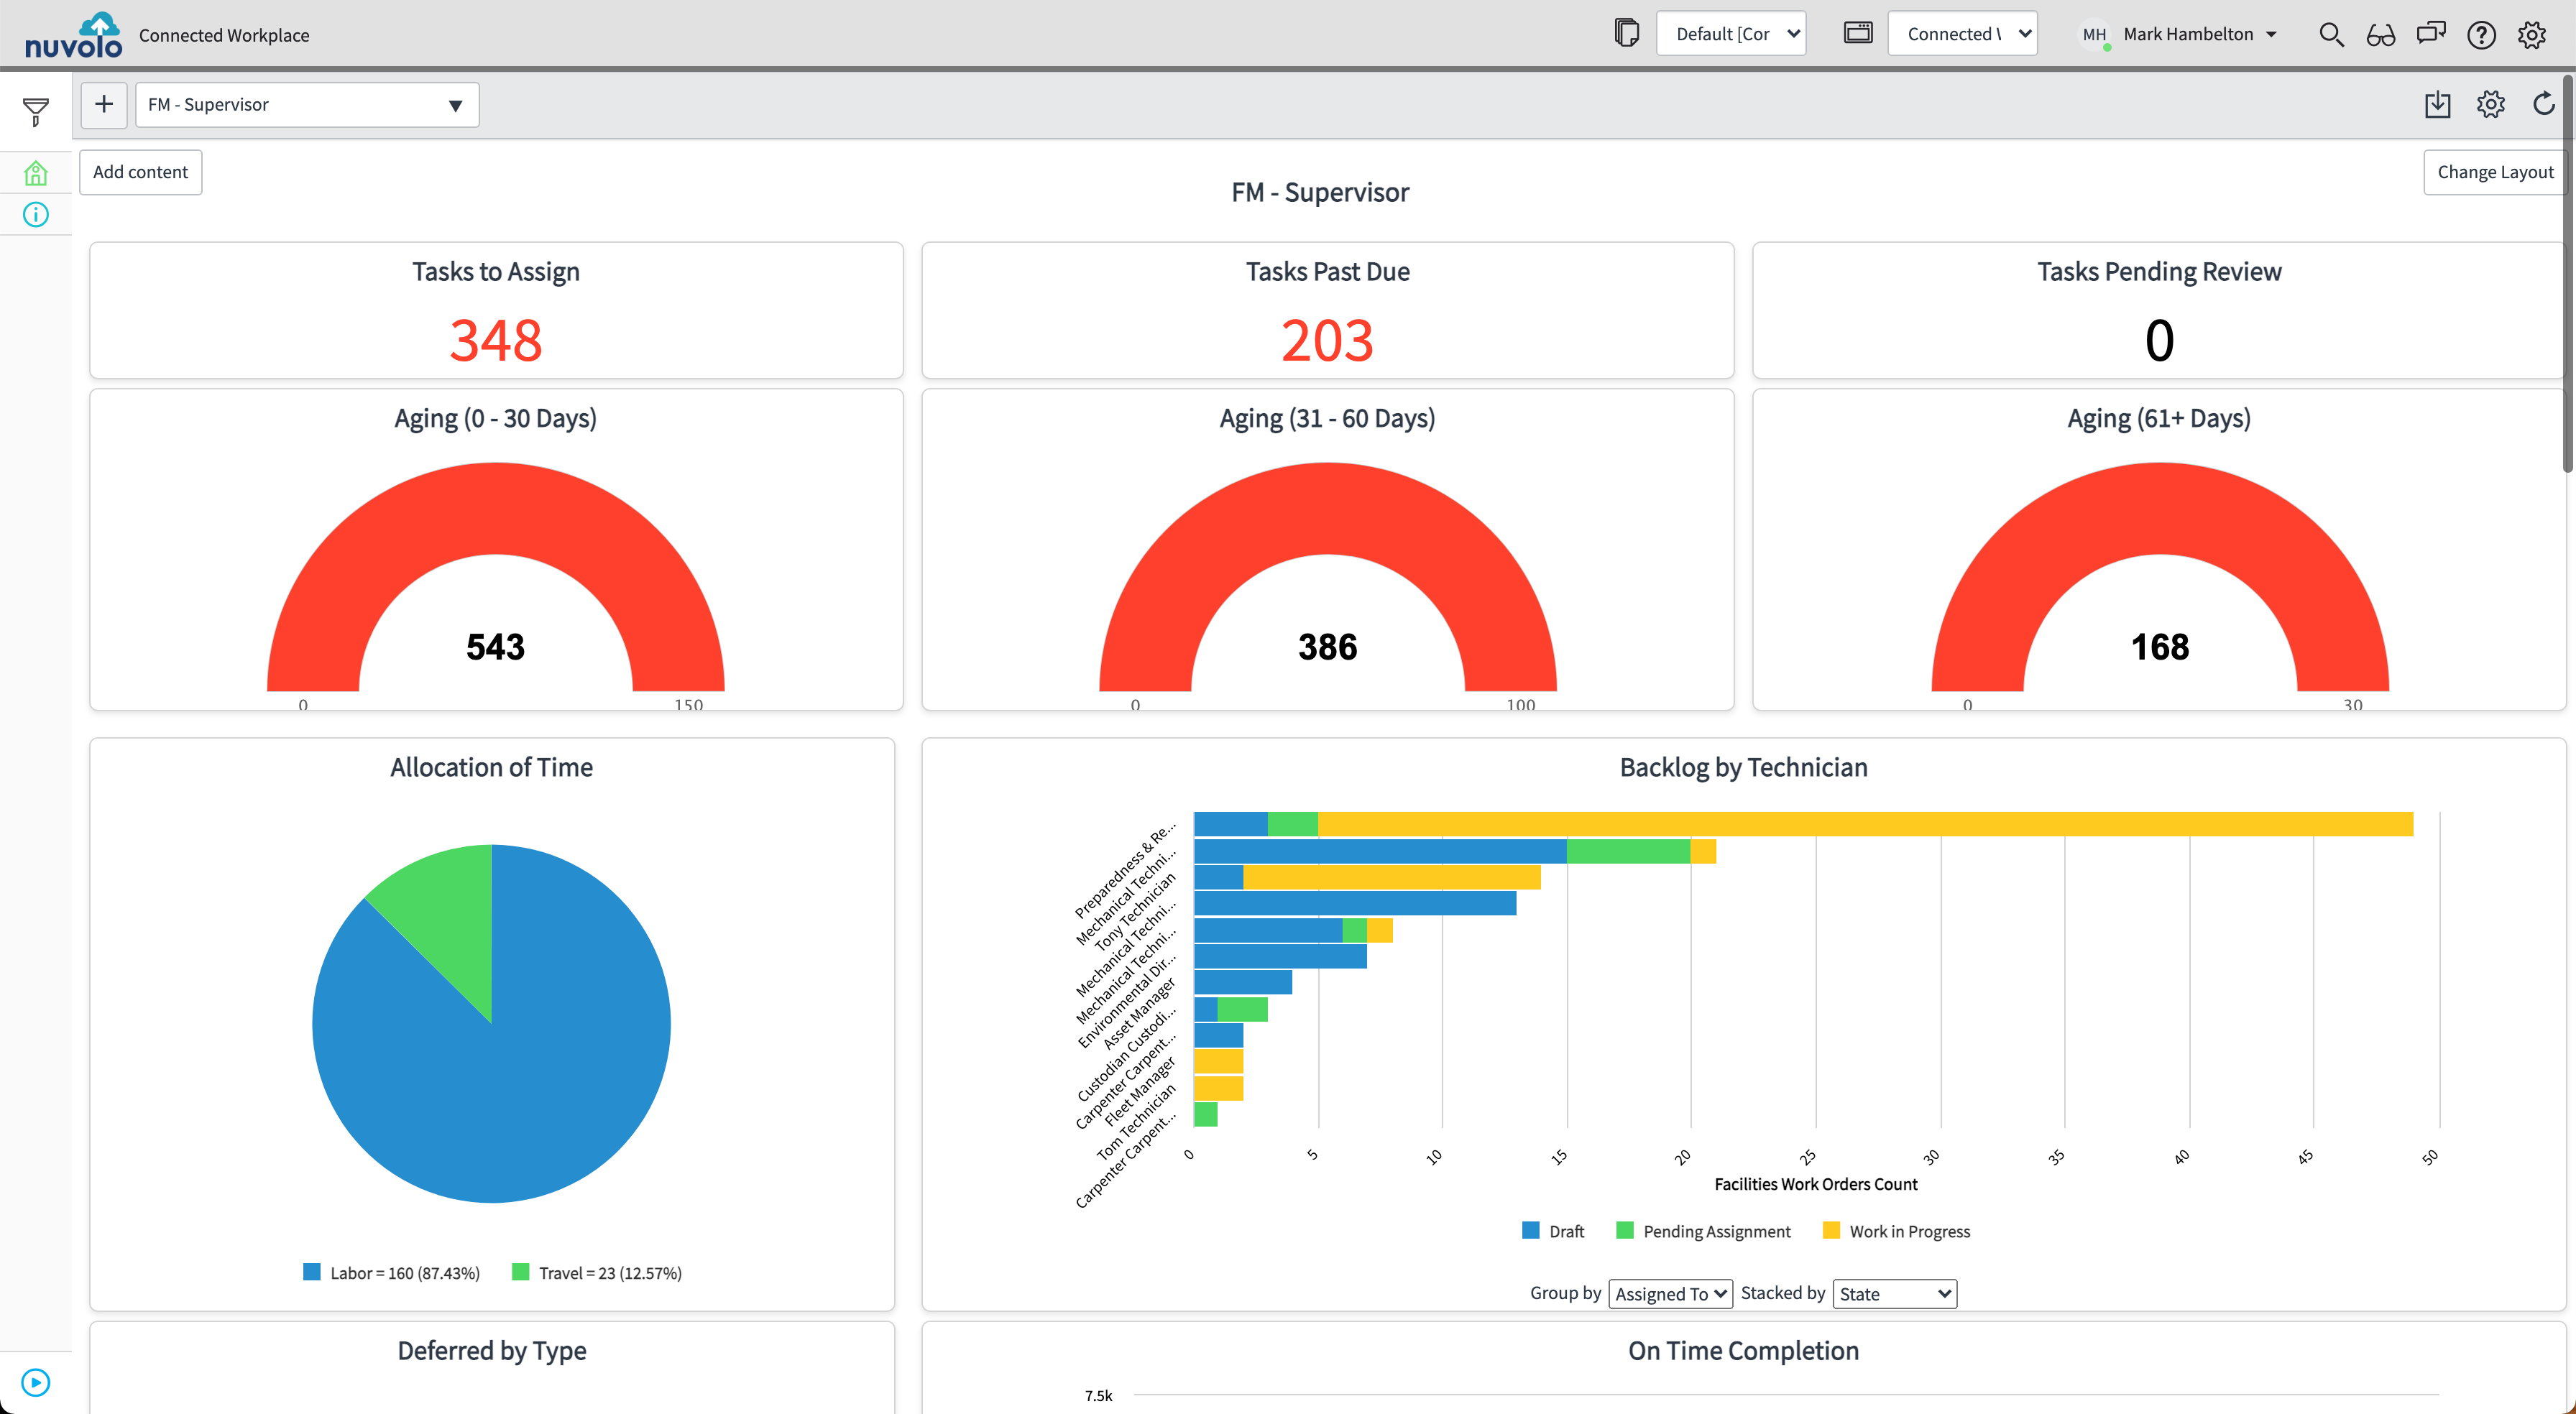 Visualize work order activities over time and view other key insights via manager dashboards